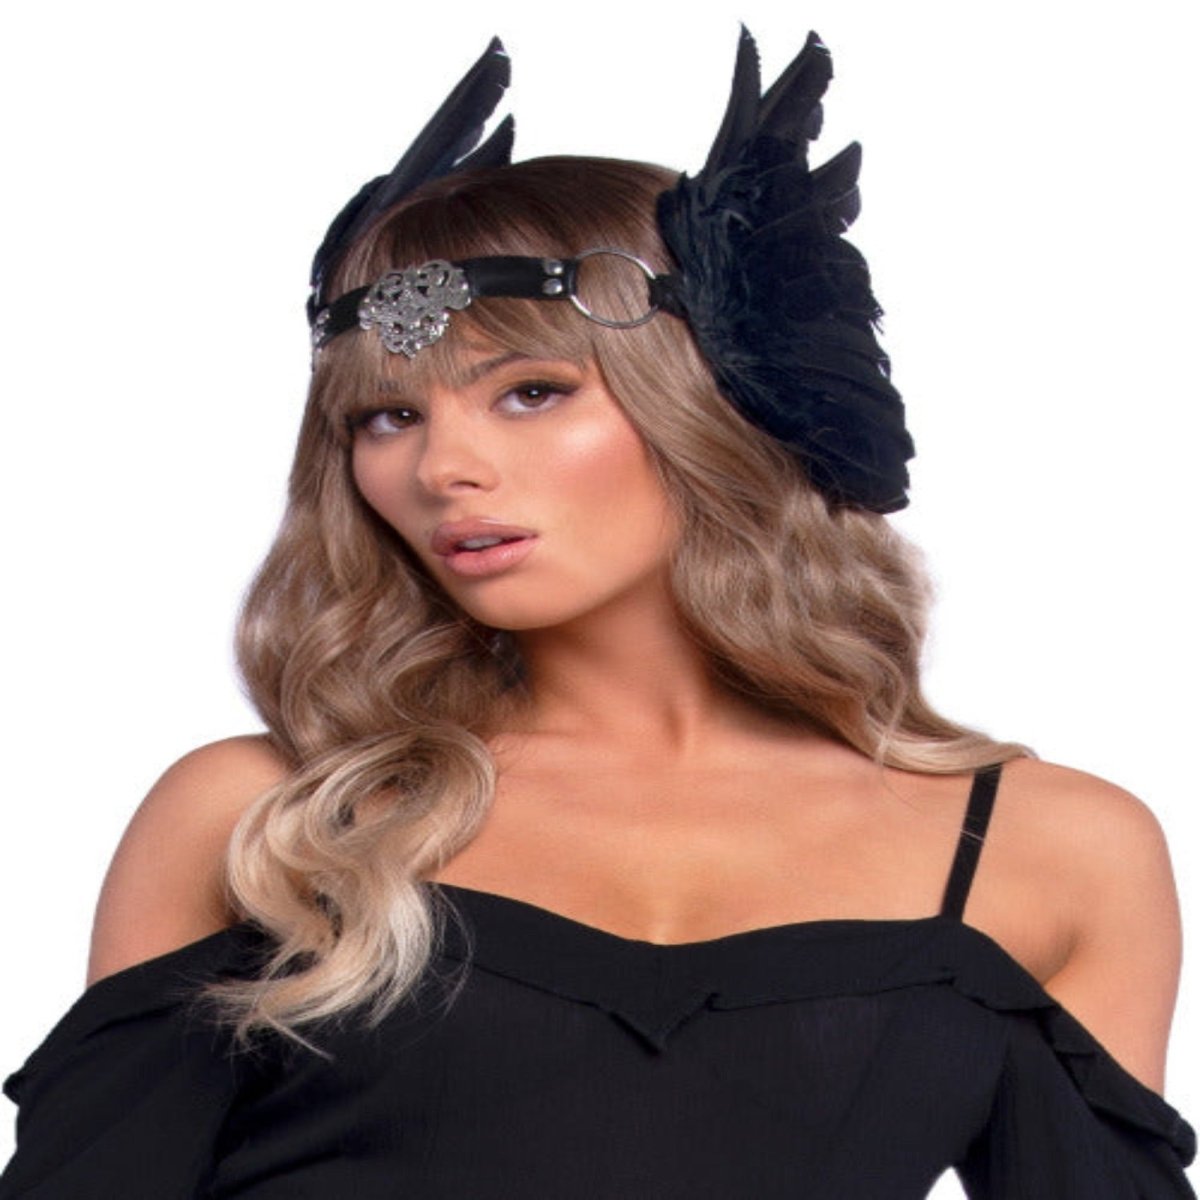 Feather headband with O-ring and metal filigree medallion accent - worldclasscostumes